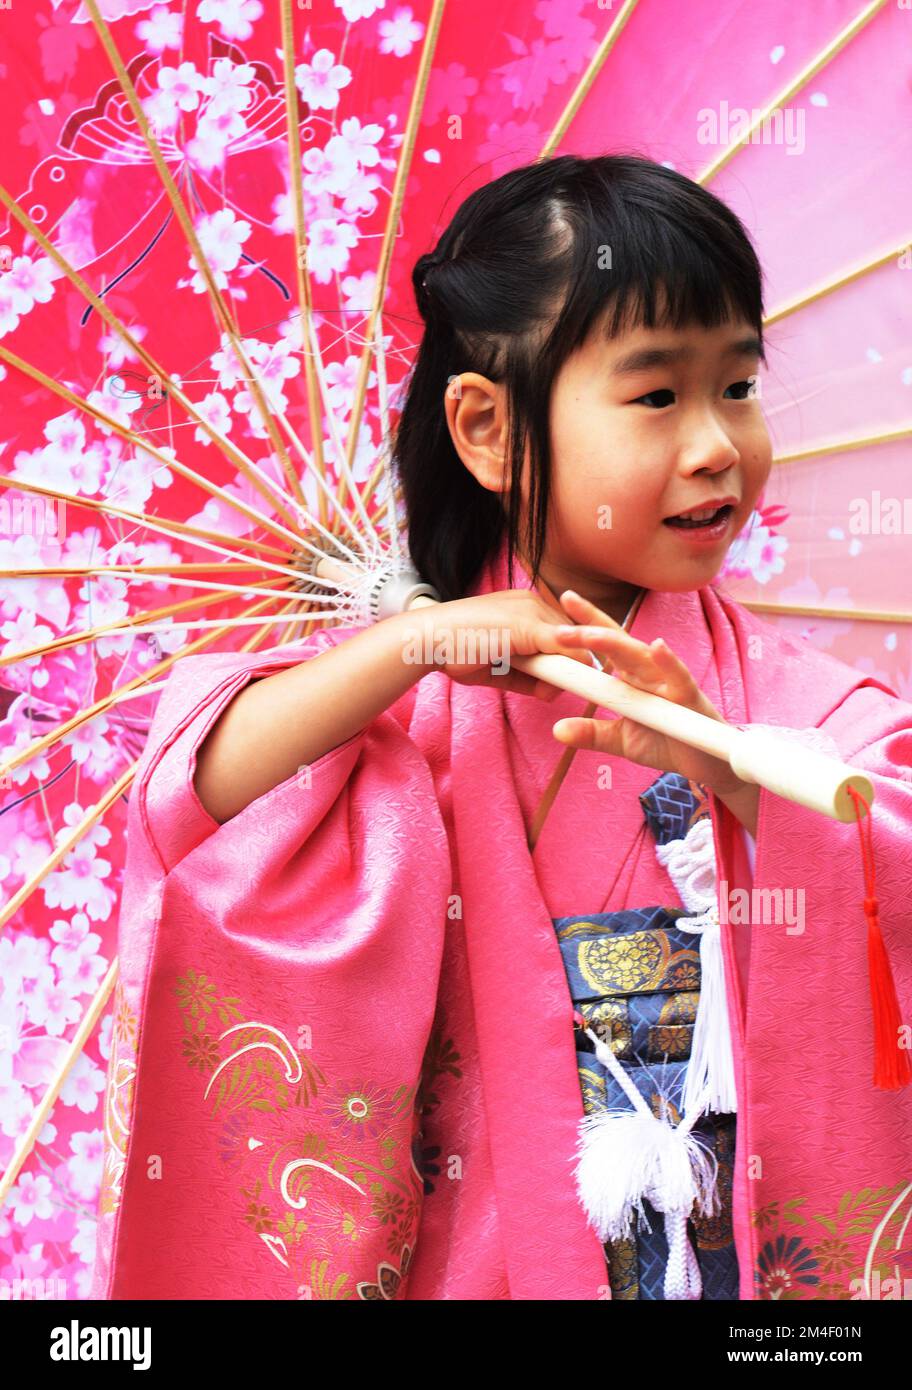 Portrait of a traditionally dressed Japanese girl taken during the Shichi-Go-San (Japanese rite of passage) festival at the Meiji Shrine, Tokyo, Japan Stock Photo